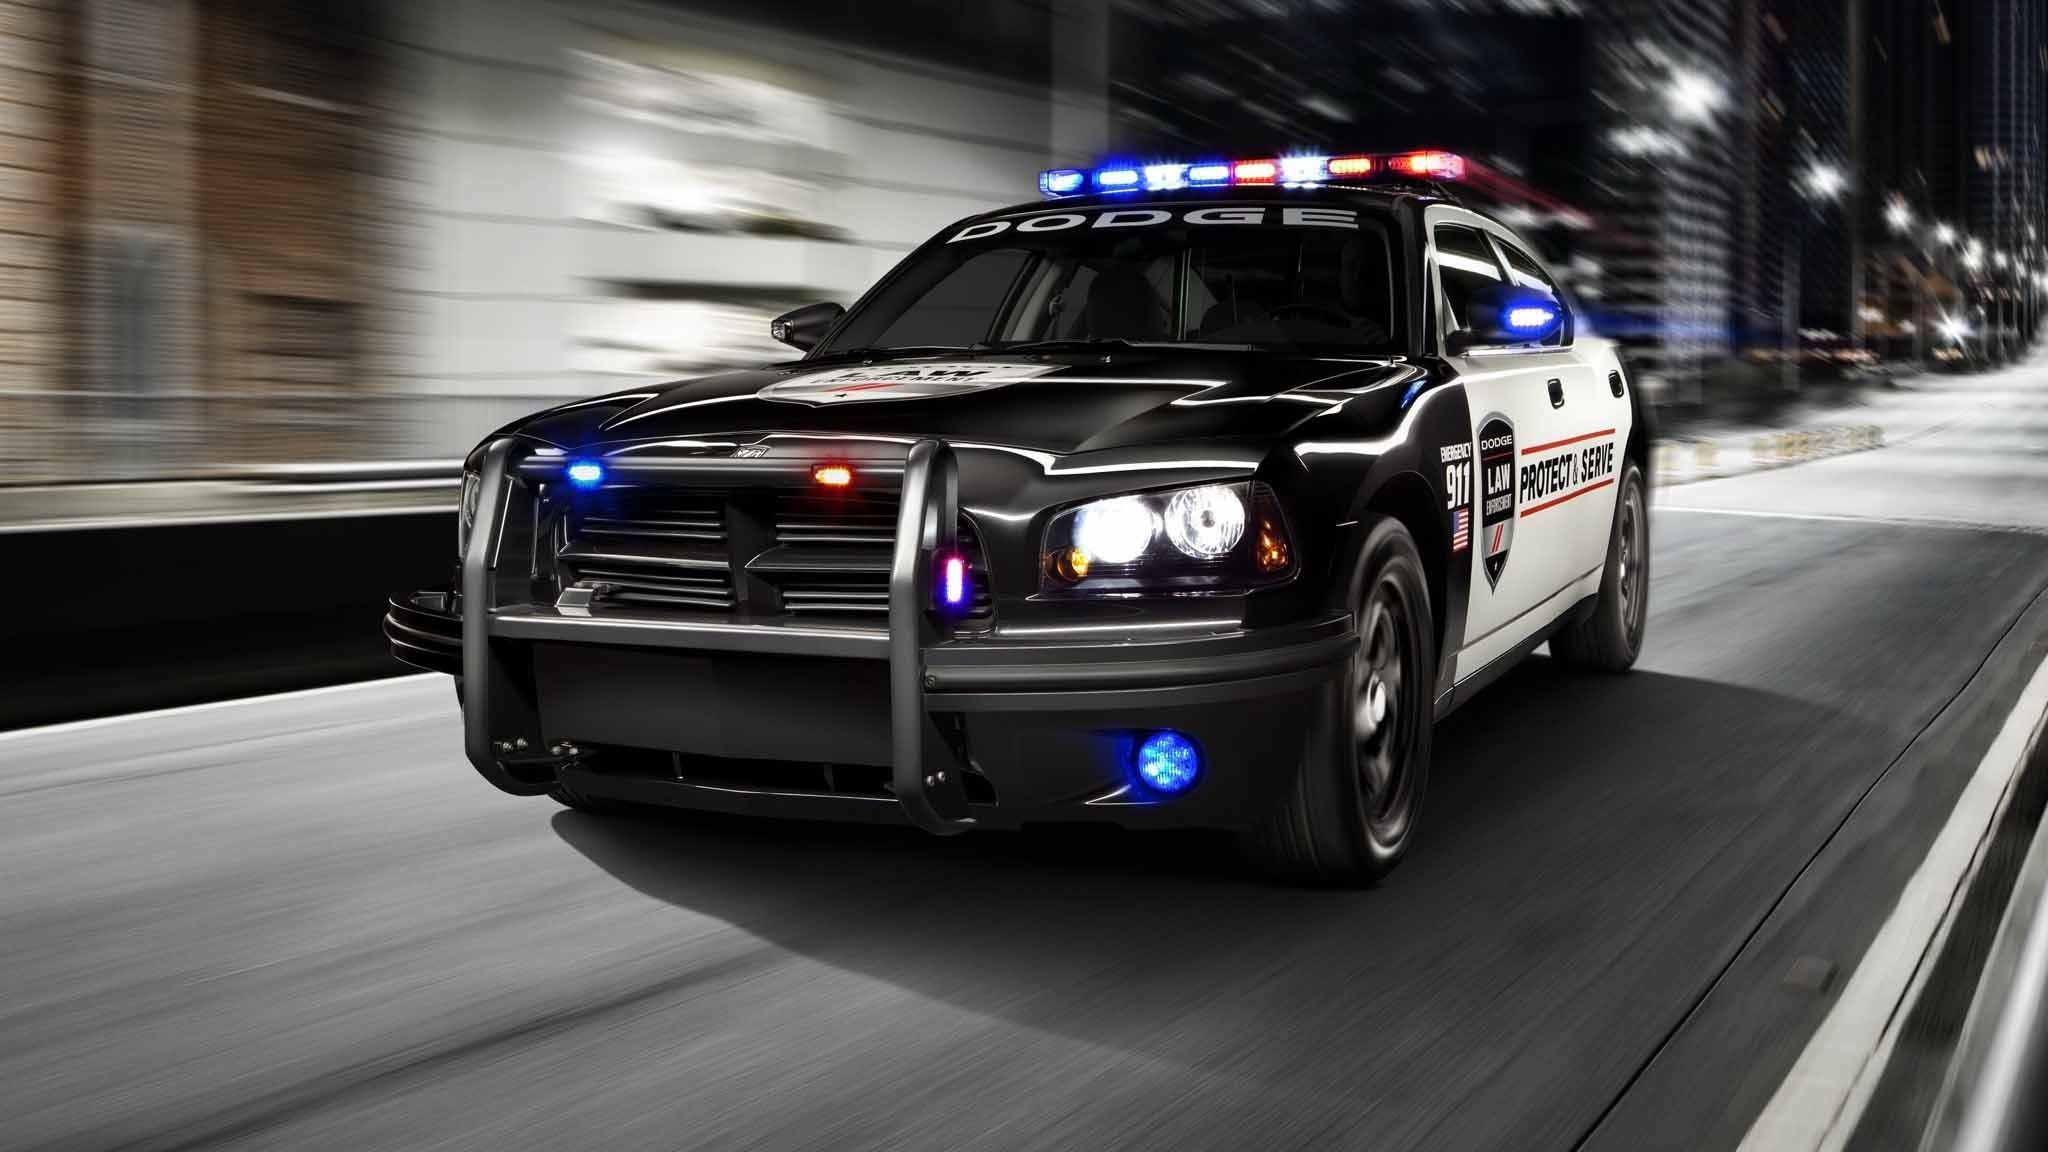 2048x1152 Cop Cars Collection See All #Wallpapers : #wallpapers #background #cars | Police cars, Police car lights, Police